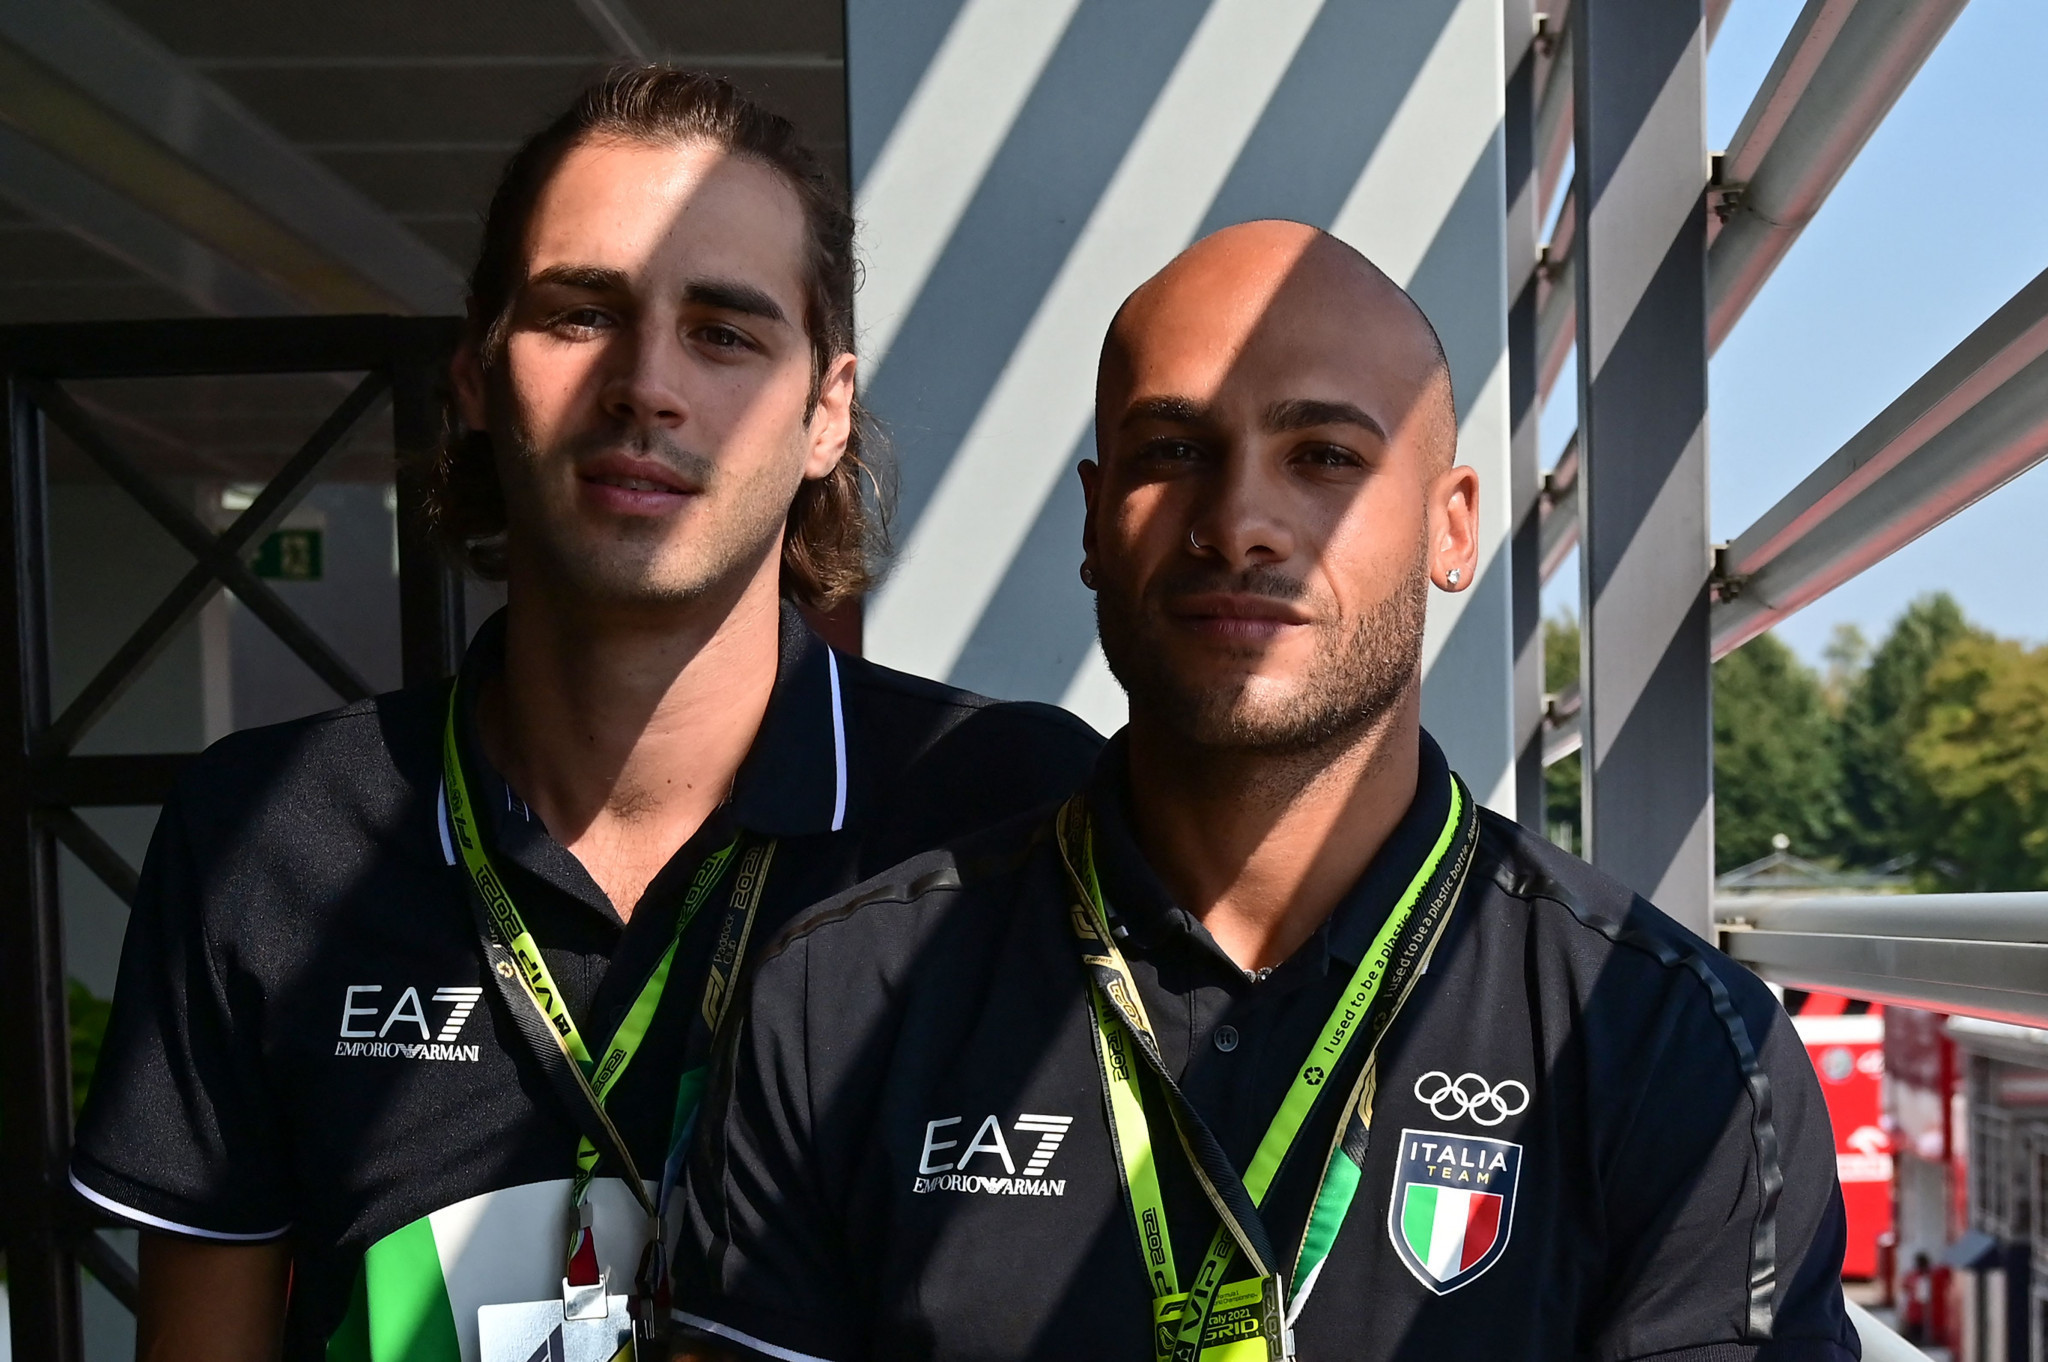 Italian National Olympic Committee President Giovanni Malagò is angry after Tokyo 2020 champions Gianmarco Tamberi, left, and Marcell Jacobs, right, were not nominated for the Male World Athlete of the Year award ©Getty Images